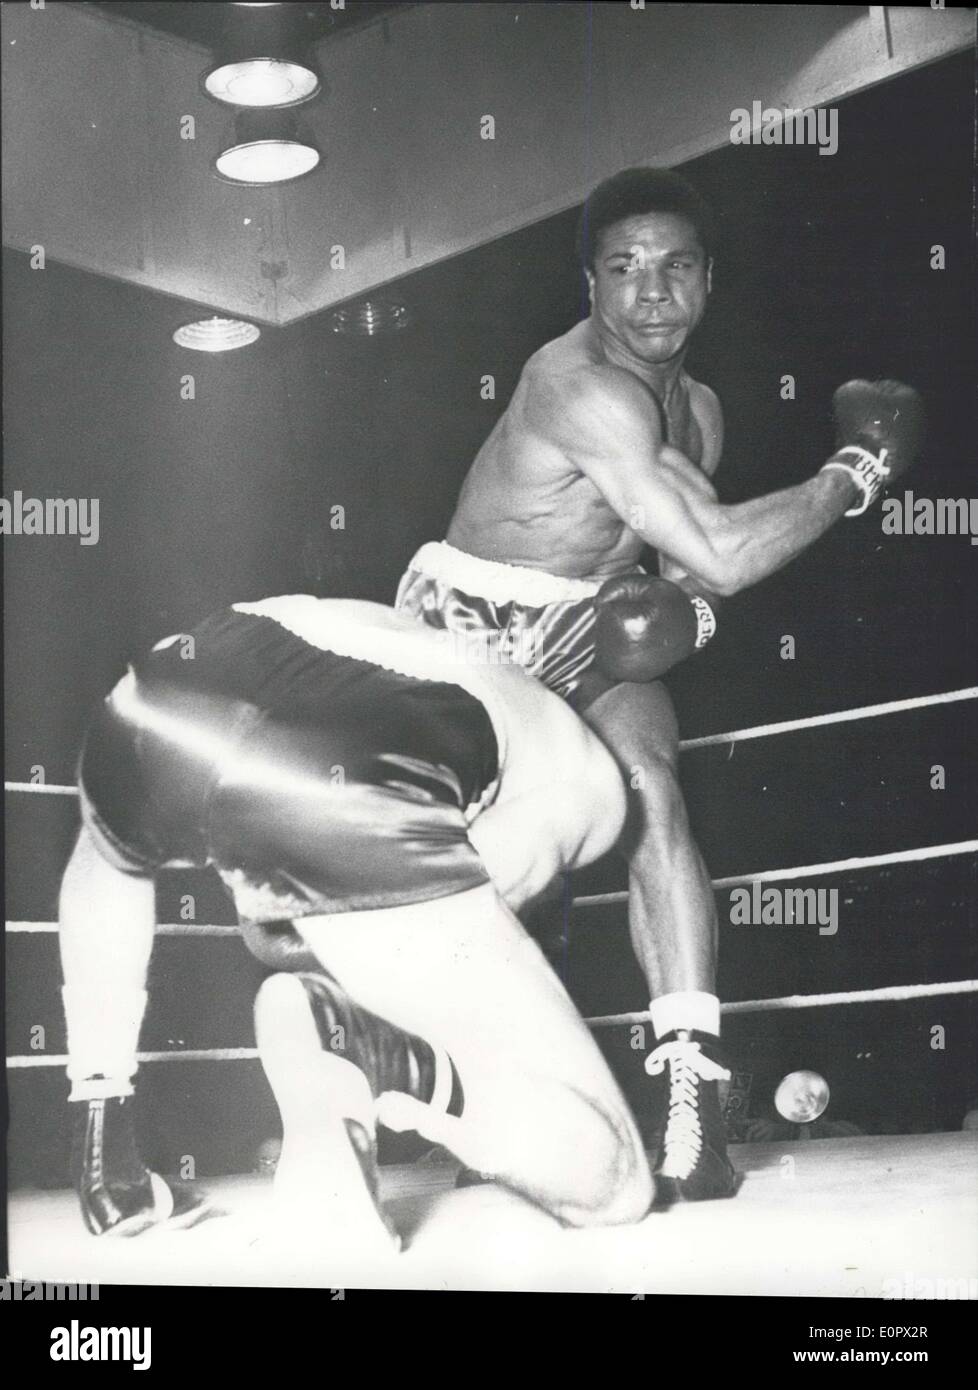 Jan. 25, 1957 - Elimination for world championship in light heavy-weight at the Berlin - Sportpalast: The German Gerhard Hecht was beaten by Ko in the 2nd round. Winner by Ko Yolande Pompey Stock Photo